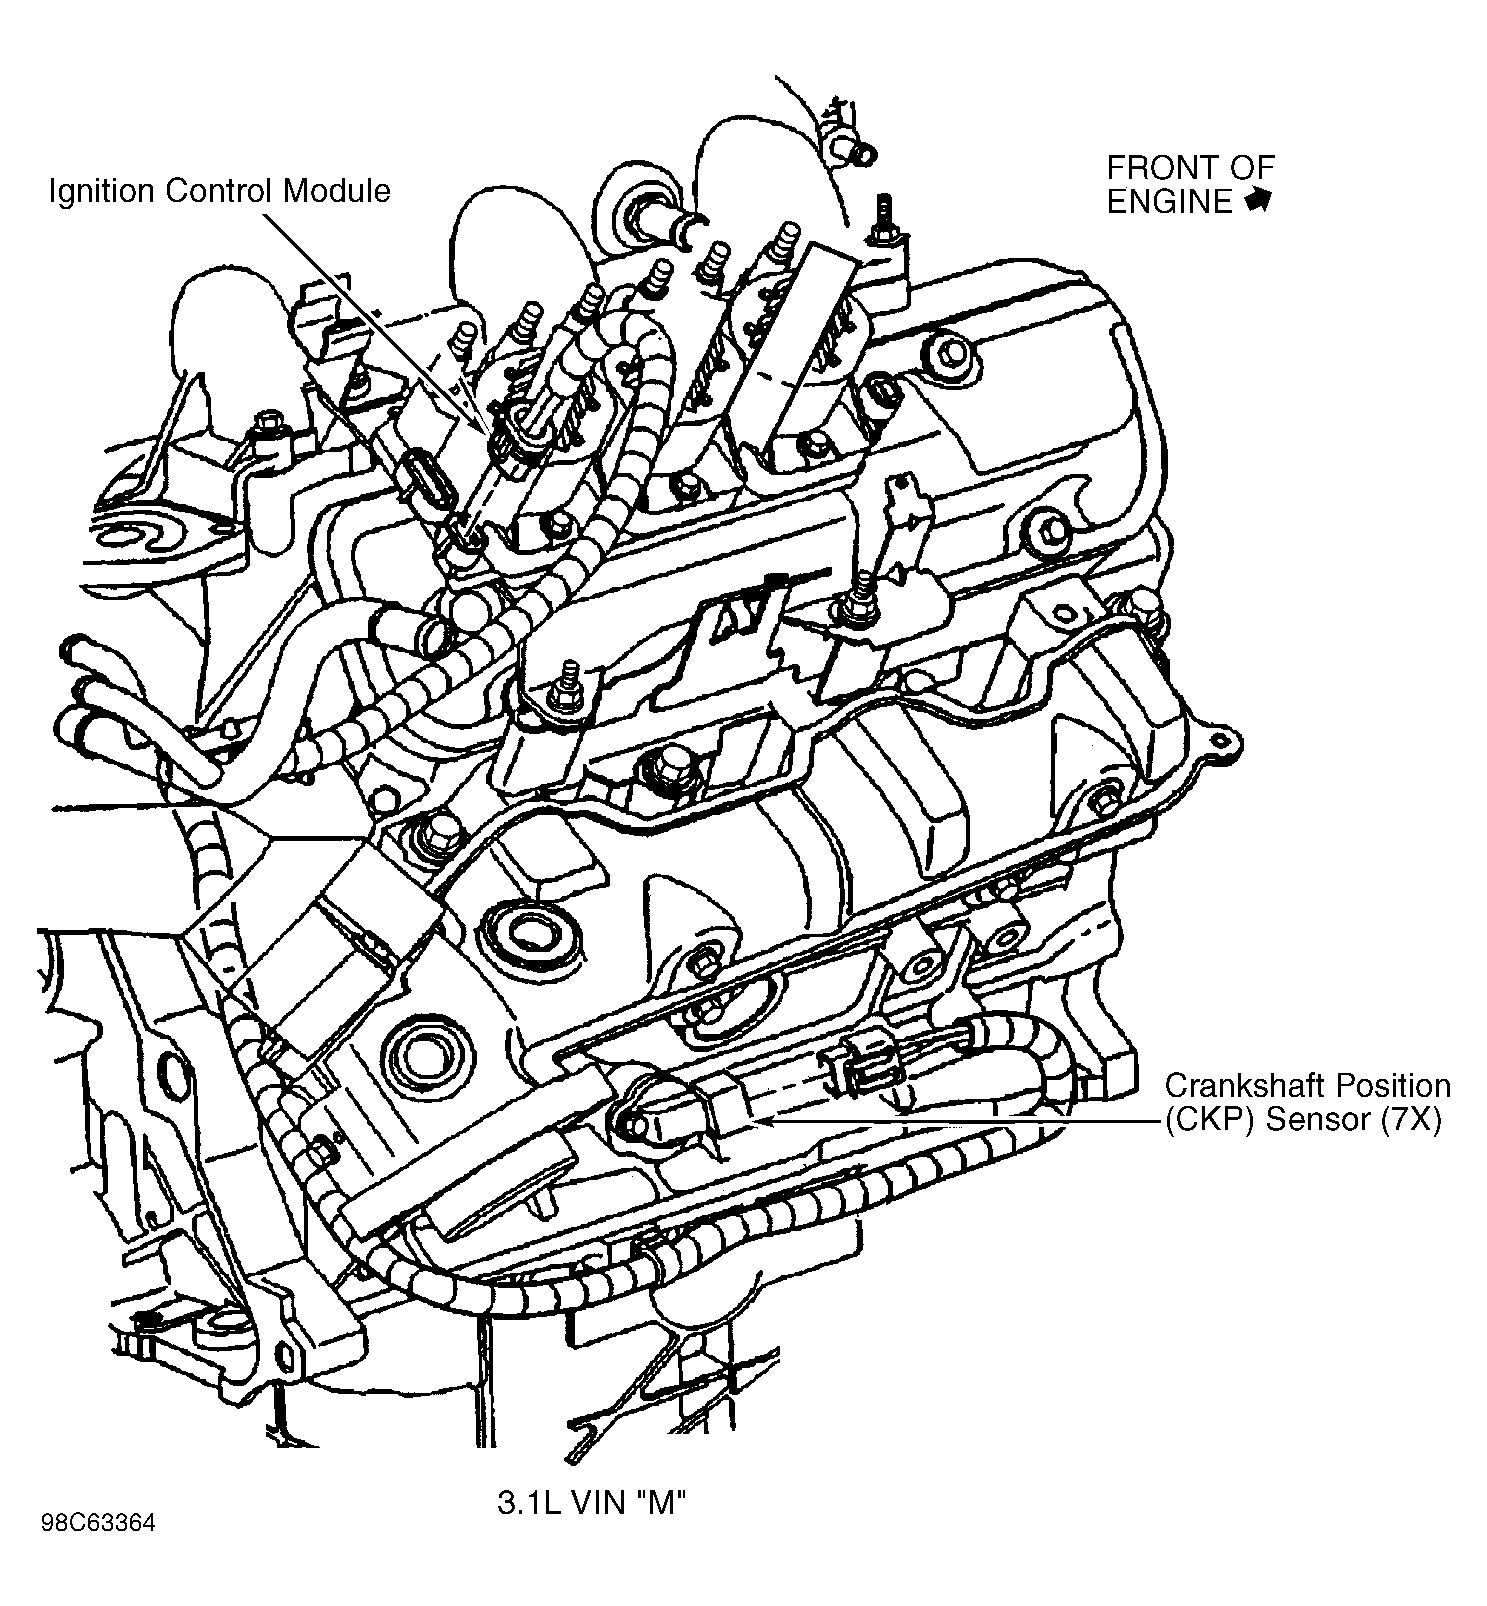 Chevrolet Lumina 2001 - Component Locations -  Right Side Of Engine (3.1L VIN M)